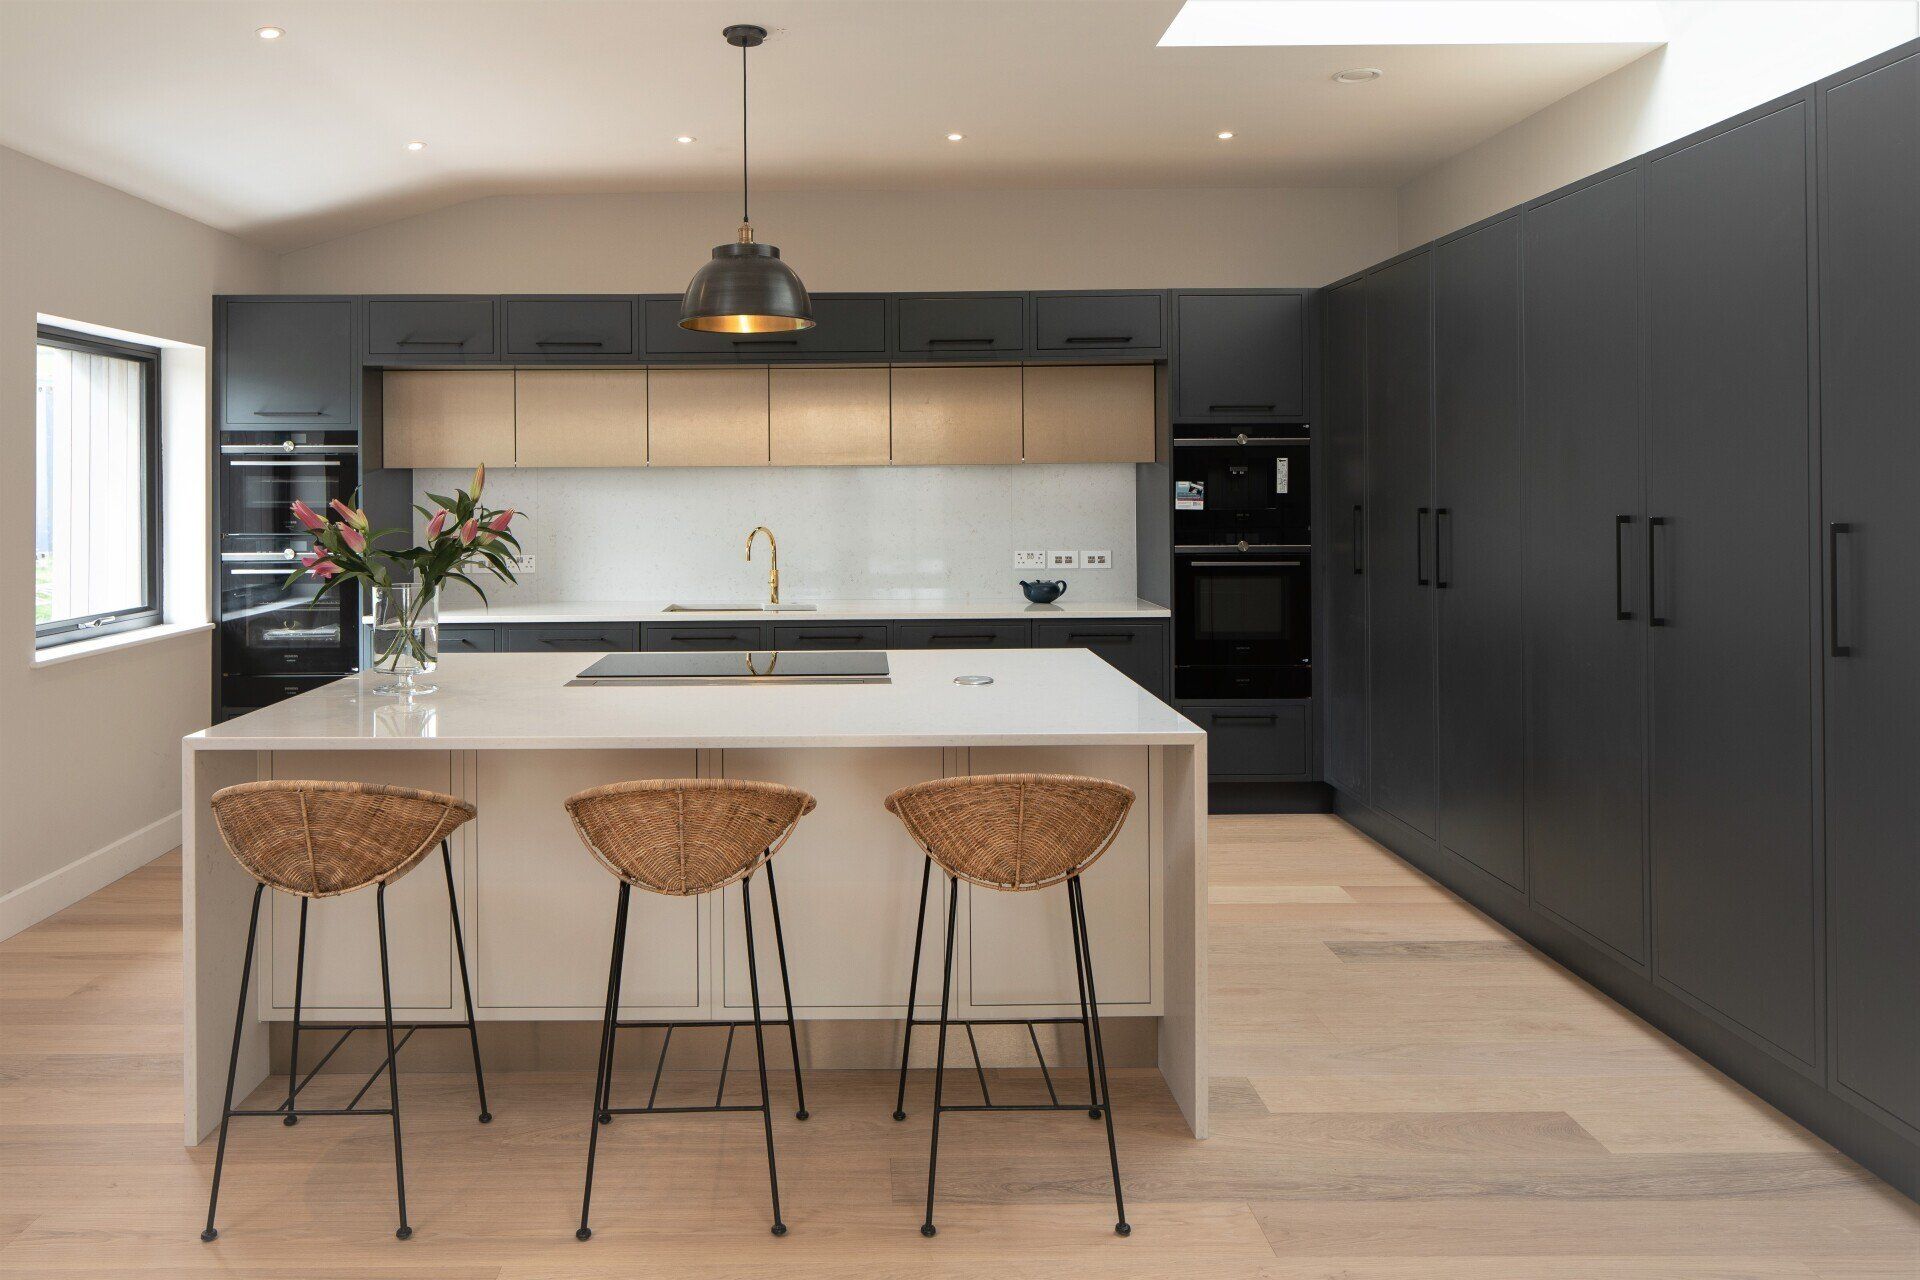 Bespoke Painted Graphite and Porcelain Inframe Kitchen- West Harptree